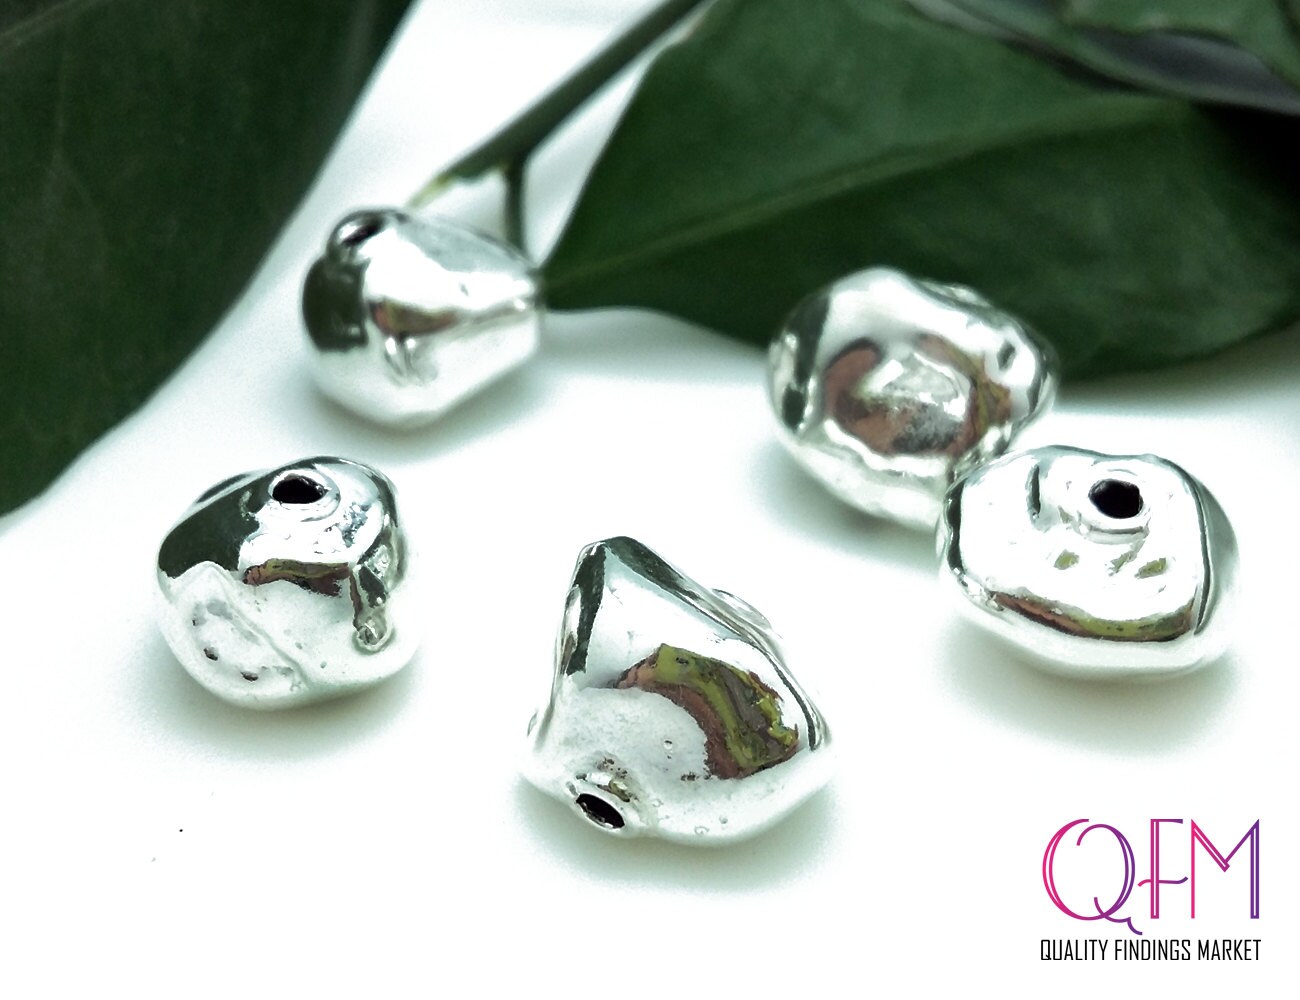 Sterling Silver 925 Square Hollow bead 15mm, Organic Cube electroforming